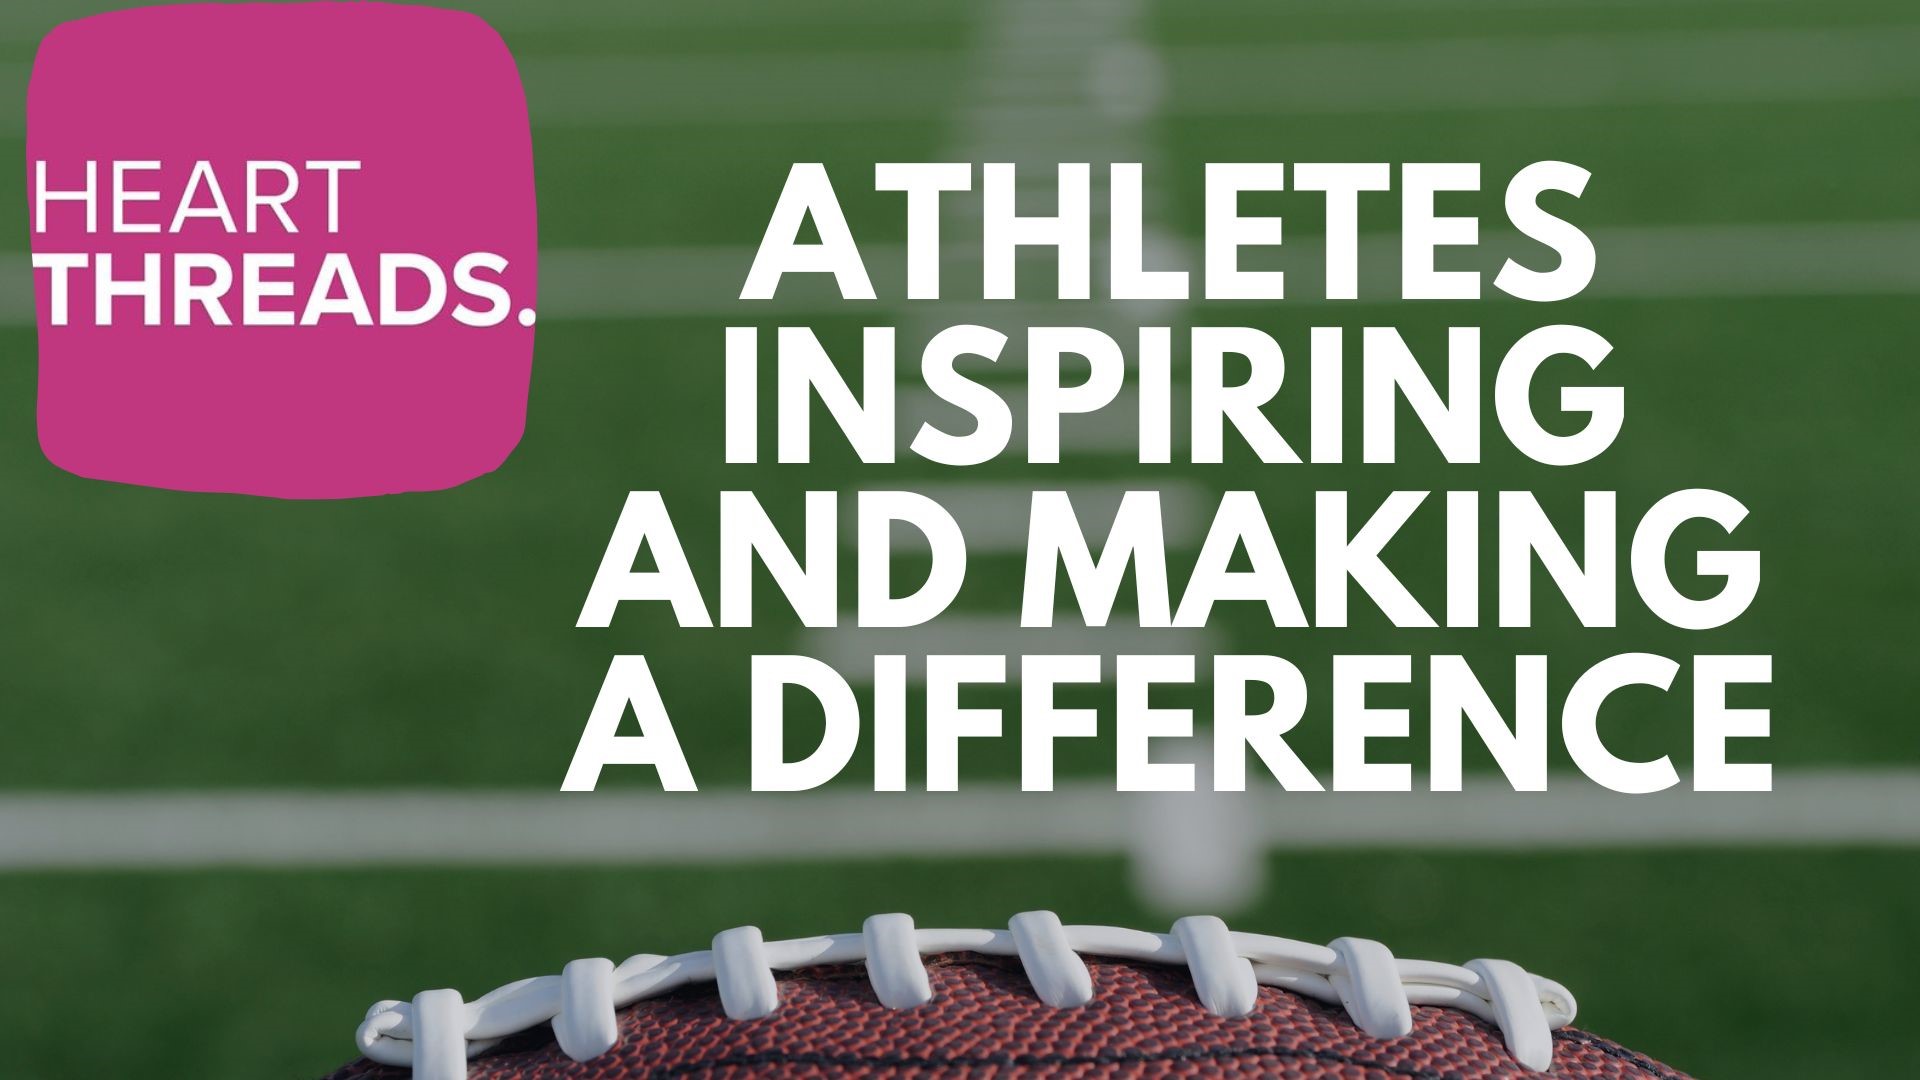 With football and baseball season in full swing, it is a great time for sports. Athletes at all levels are still working to make a difference and inspire others.